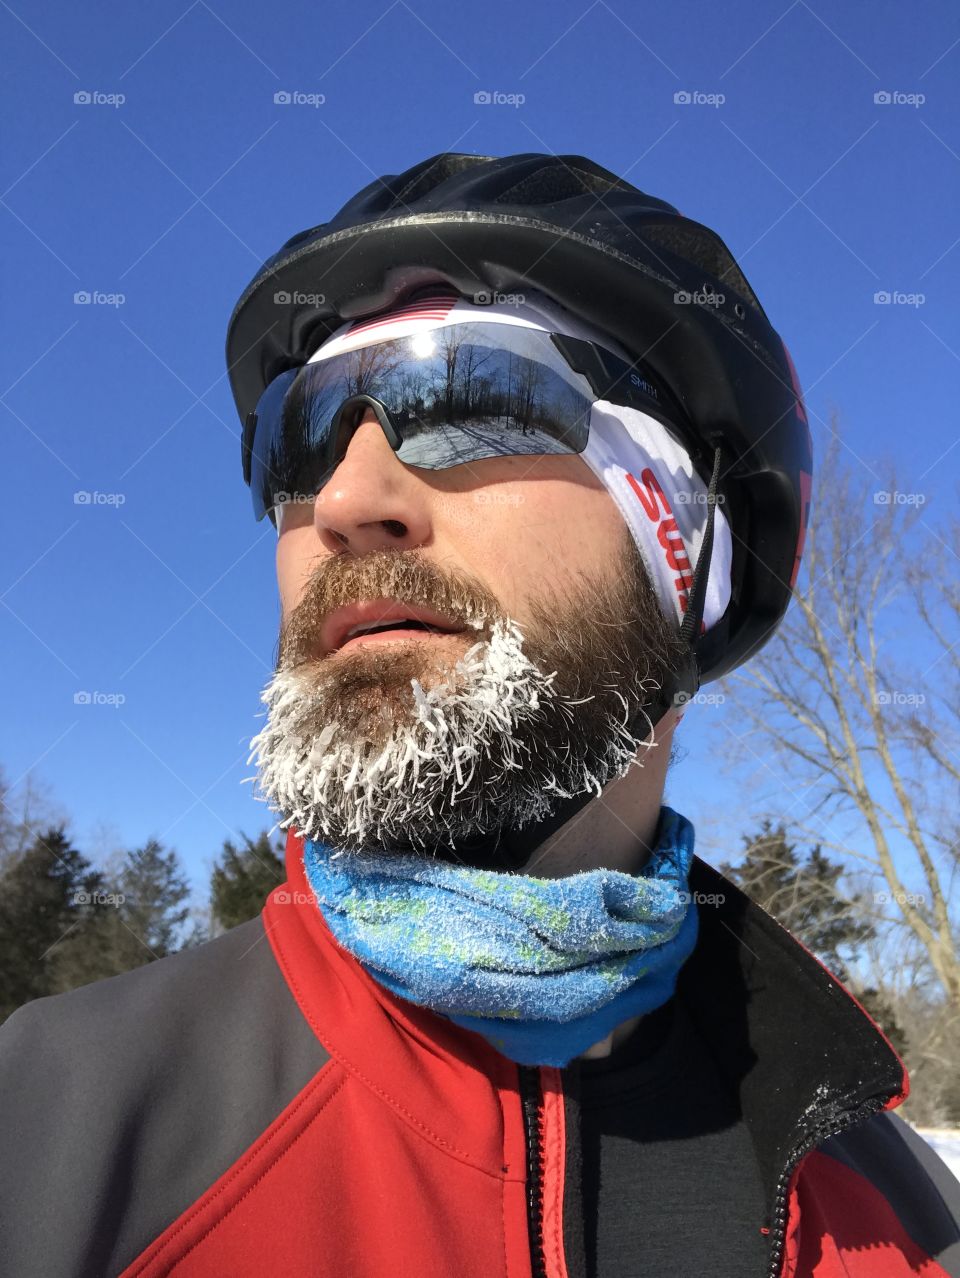 Ice beard on a cold day in Wisconsin after a fat tire bike ride.